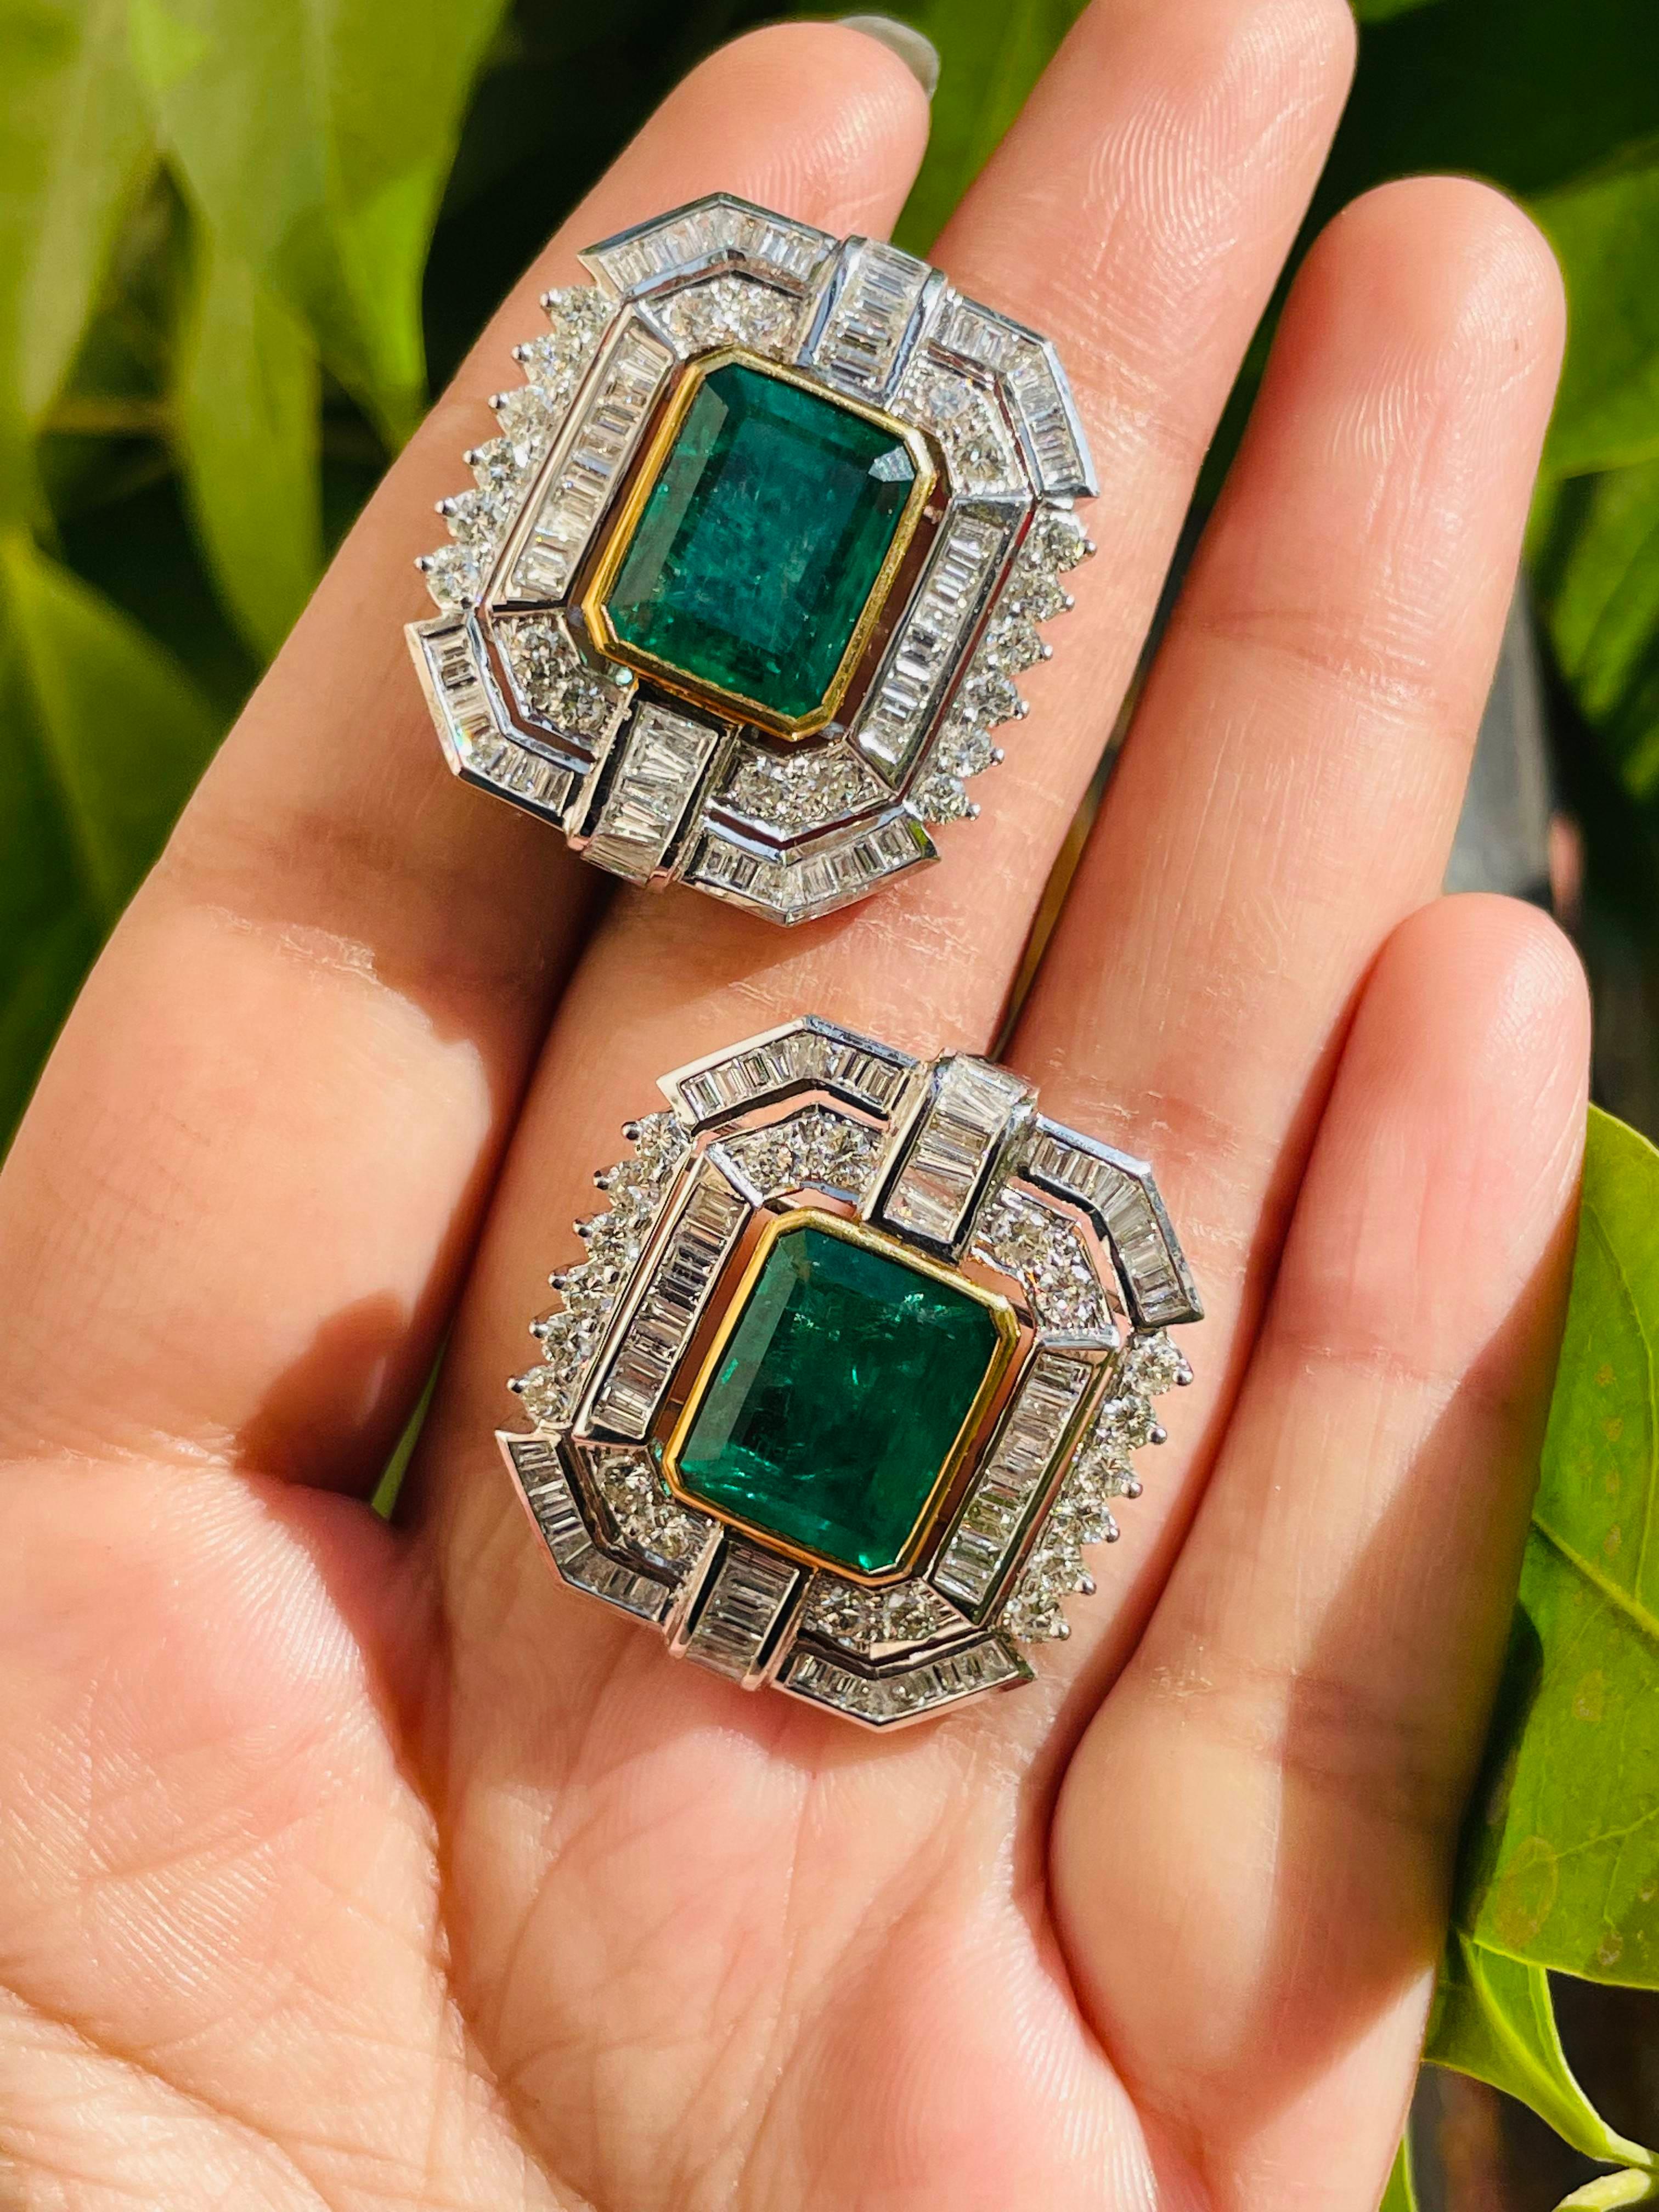 Studs create a subtle beauty while showcasing the colors of the natural precious gemstones and illuminating diamonds making a statement.

Oval cut Emerald studs with diamonds in 18K gold. Embrace your look with these stunning pair of earrings